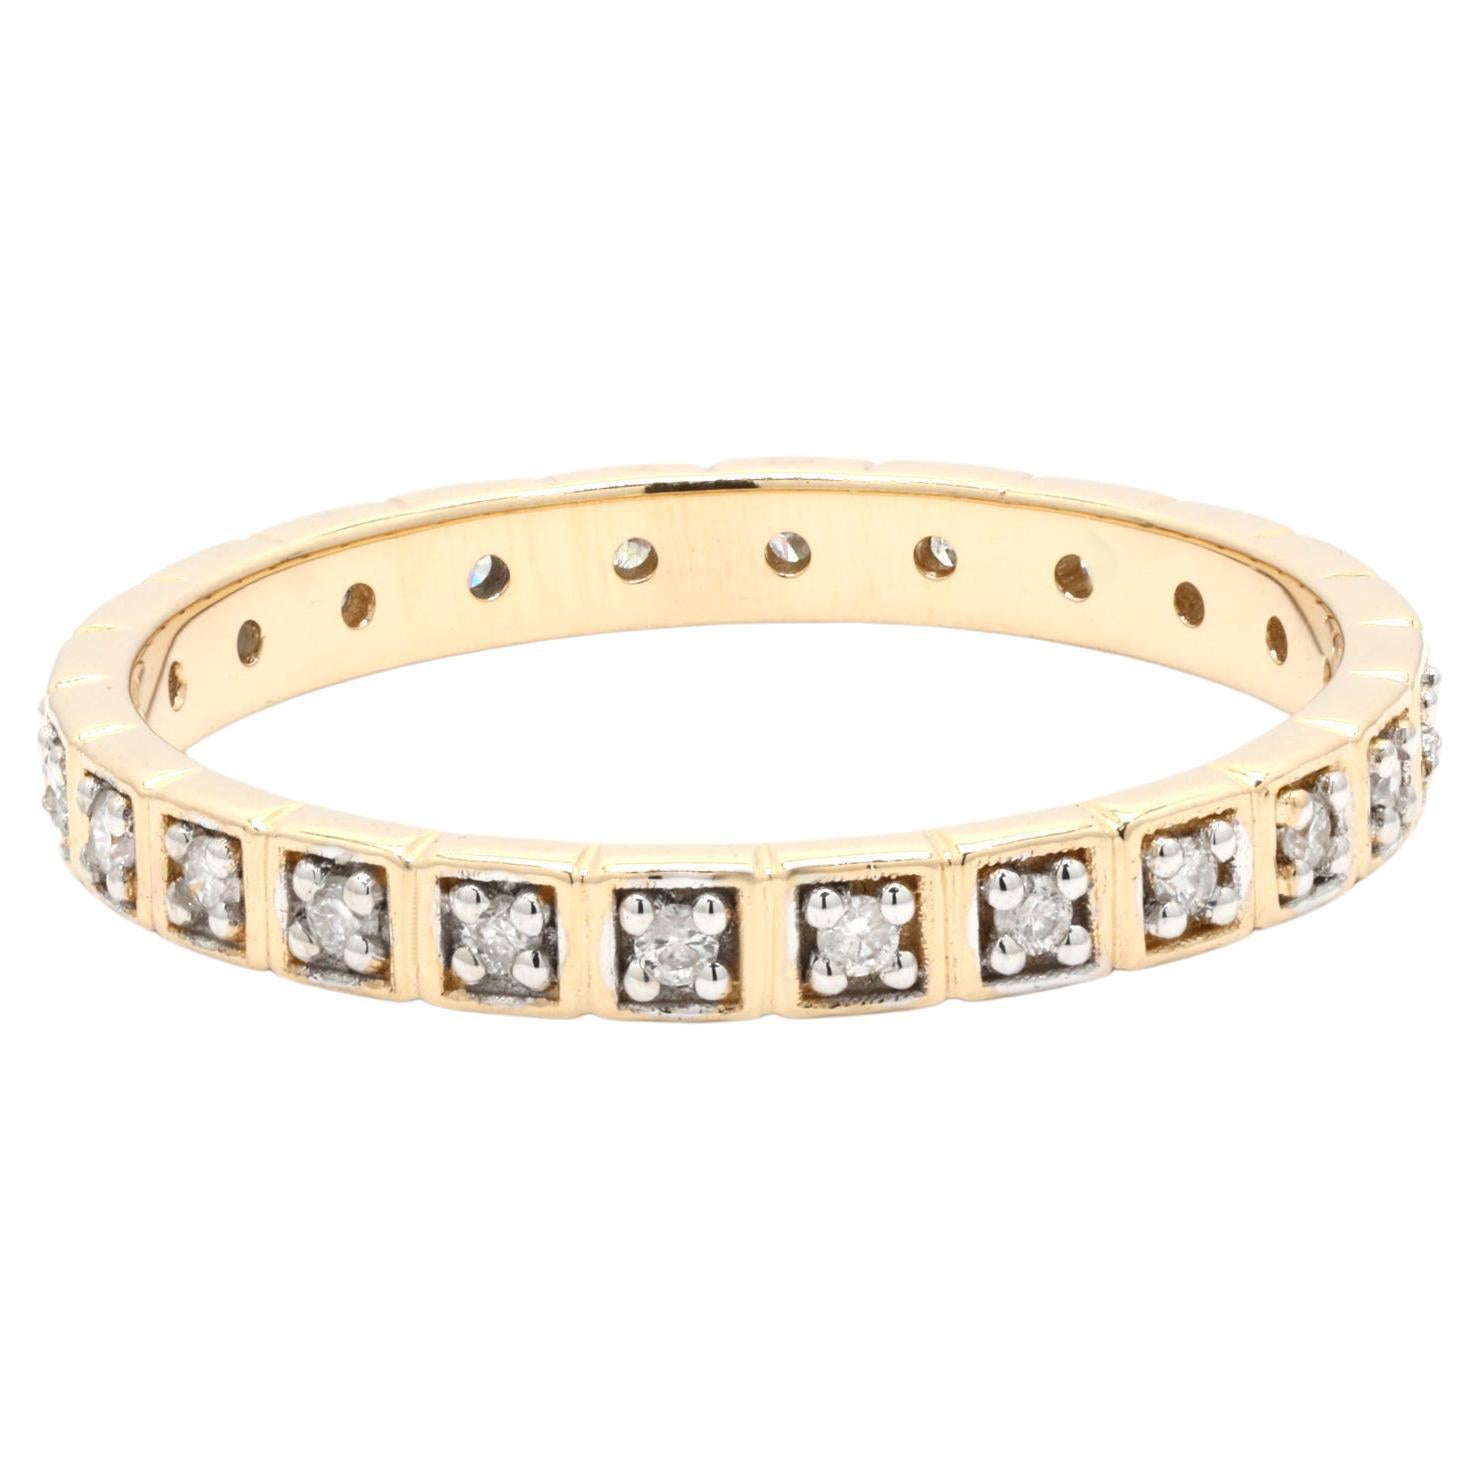 For Sale:  Unisex Diamond Eternity Band Ring in 14K Yellow Gold